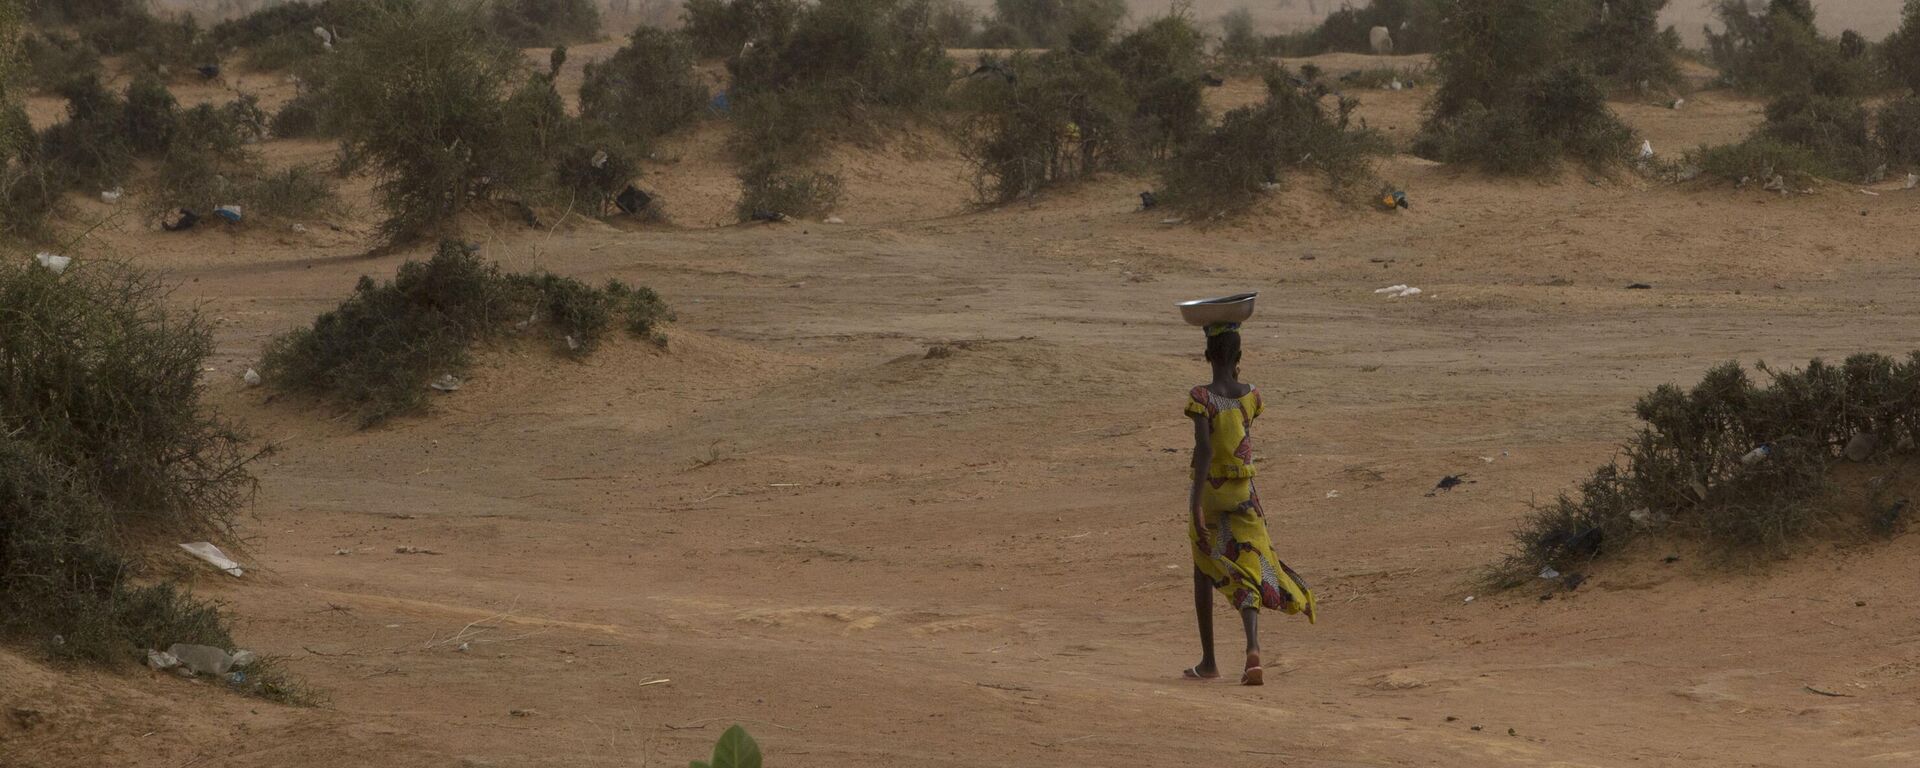 In this Monday, April 30, 2012 photo, a girl follows a village path through a landscape dotted with thorny scrub brush, in the Matam region of northeastern Senegal.  - Sputnik International, 1920, 08.03.2023